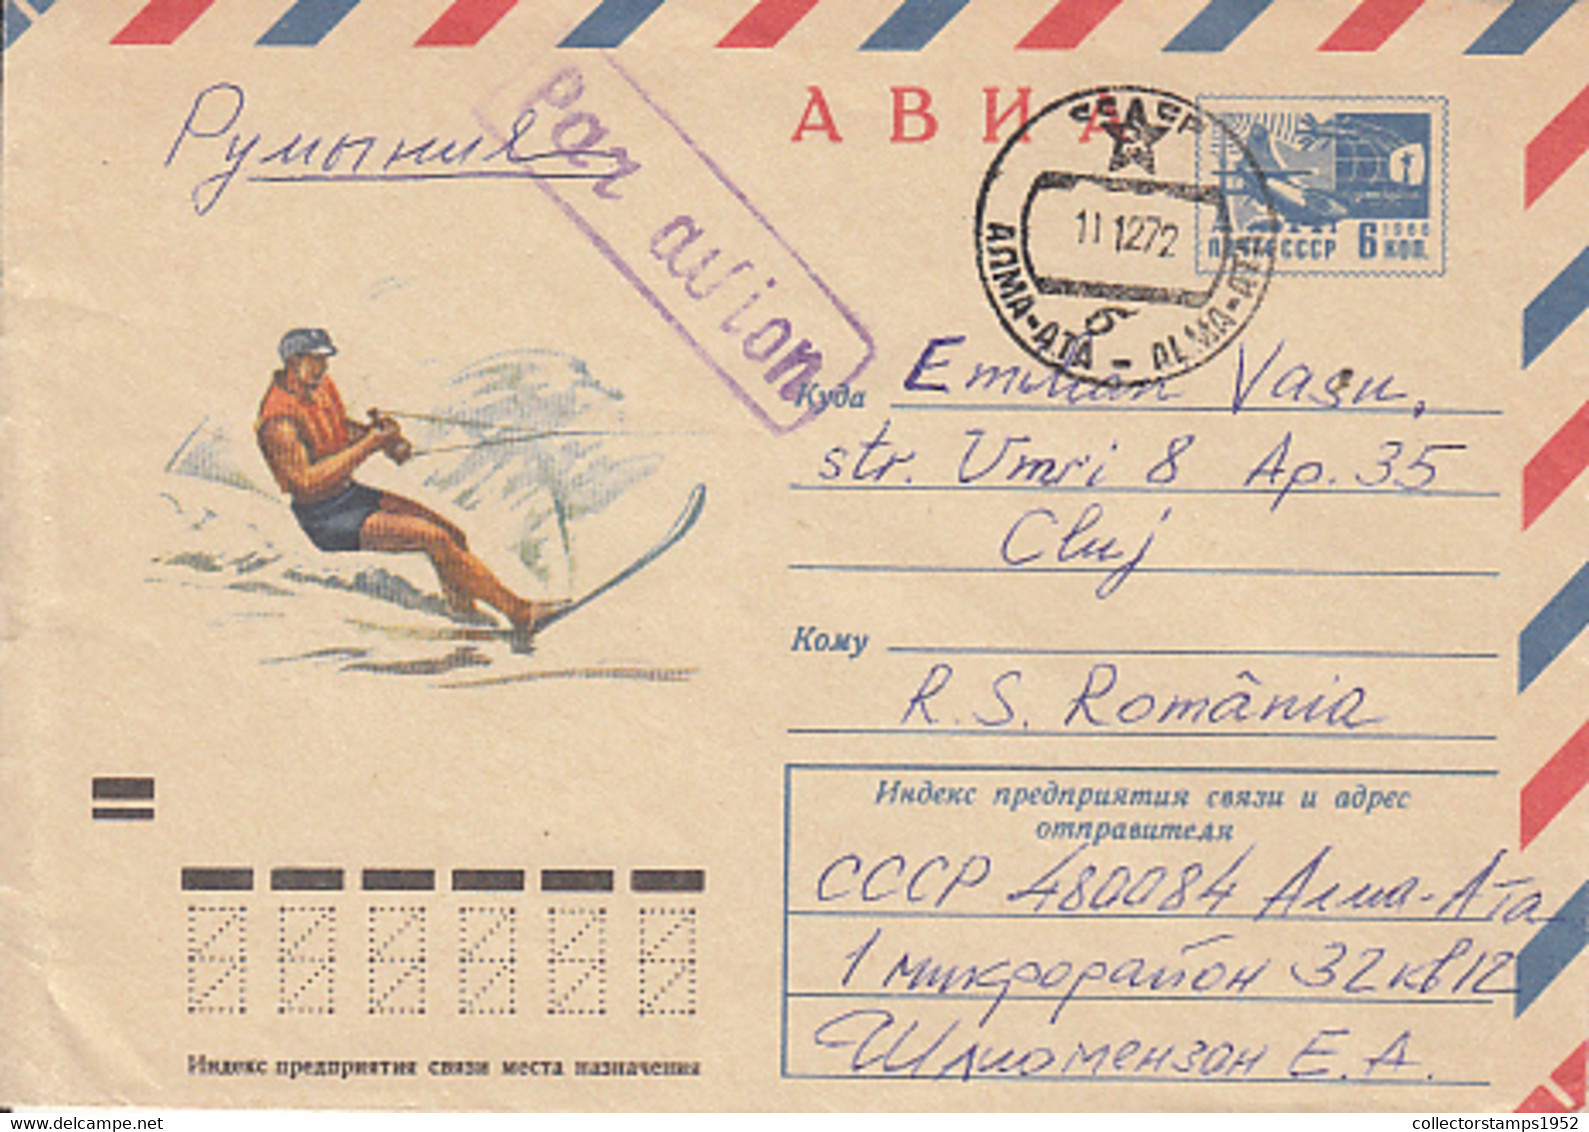 93284- WATER SKIING, SPORTS, COVER STATIONERY, 1972, RUSSIA-USSR - Water-skiing